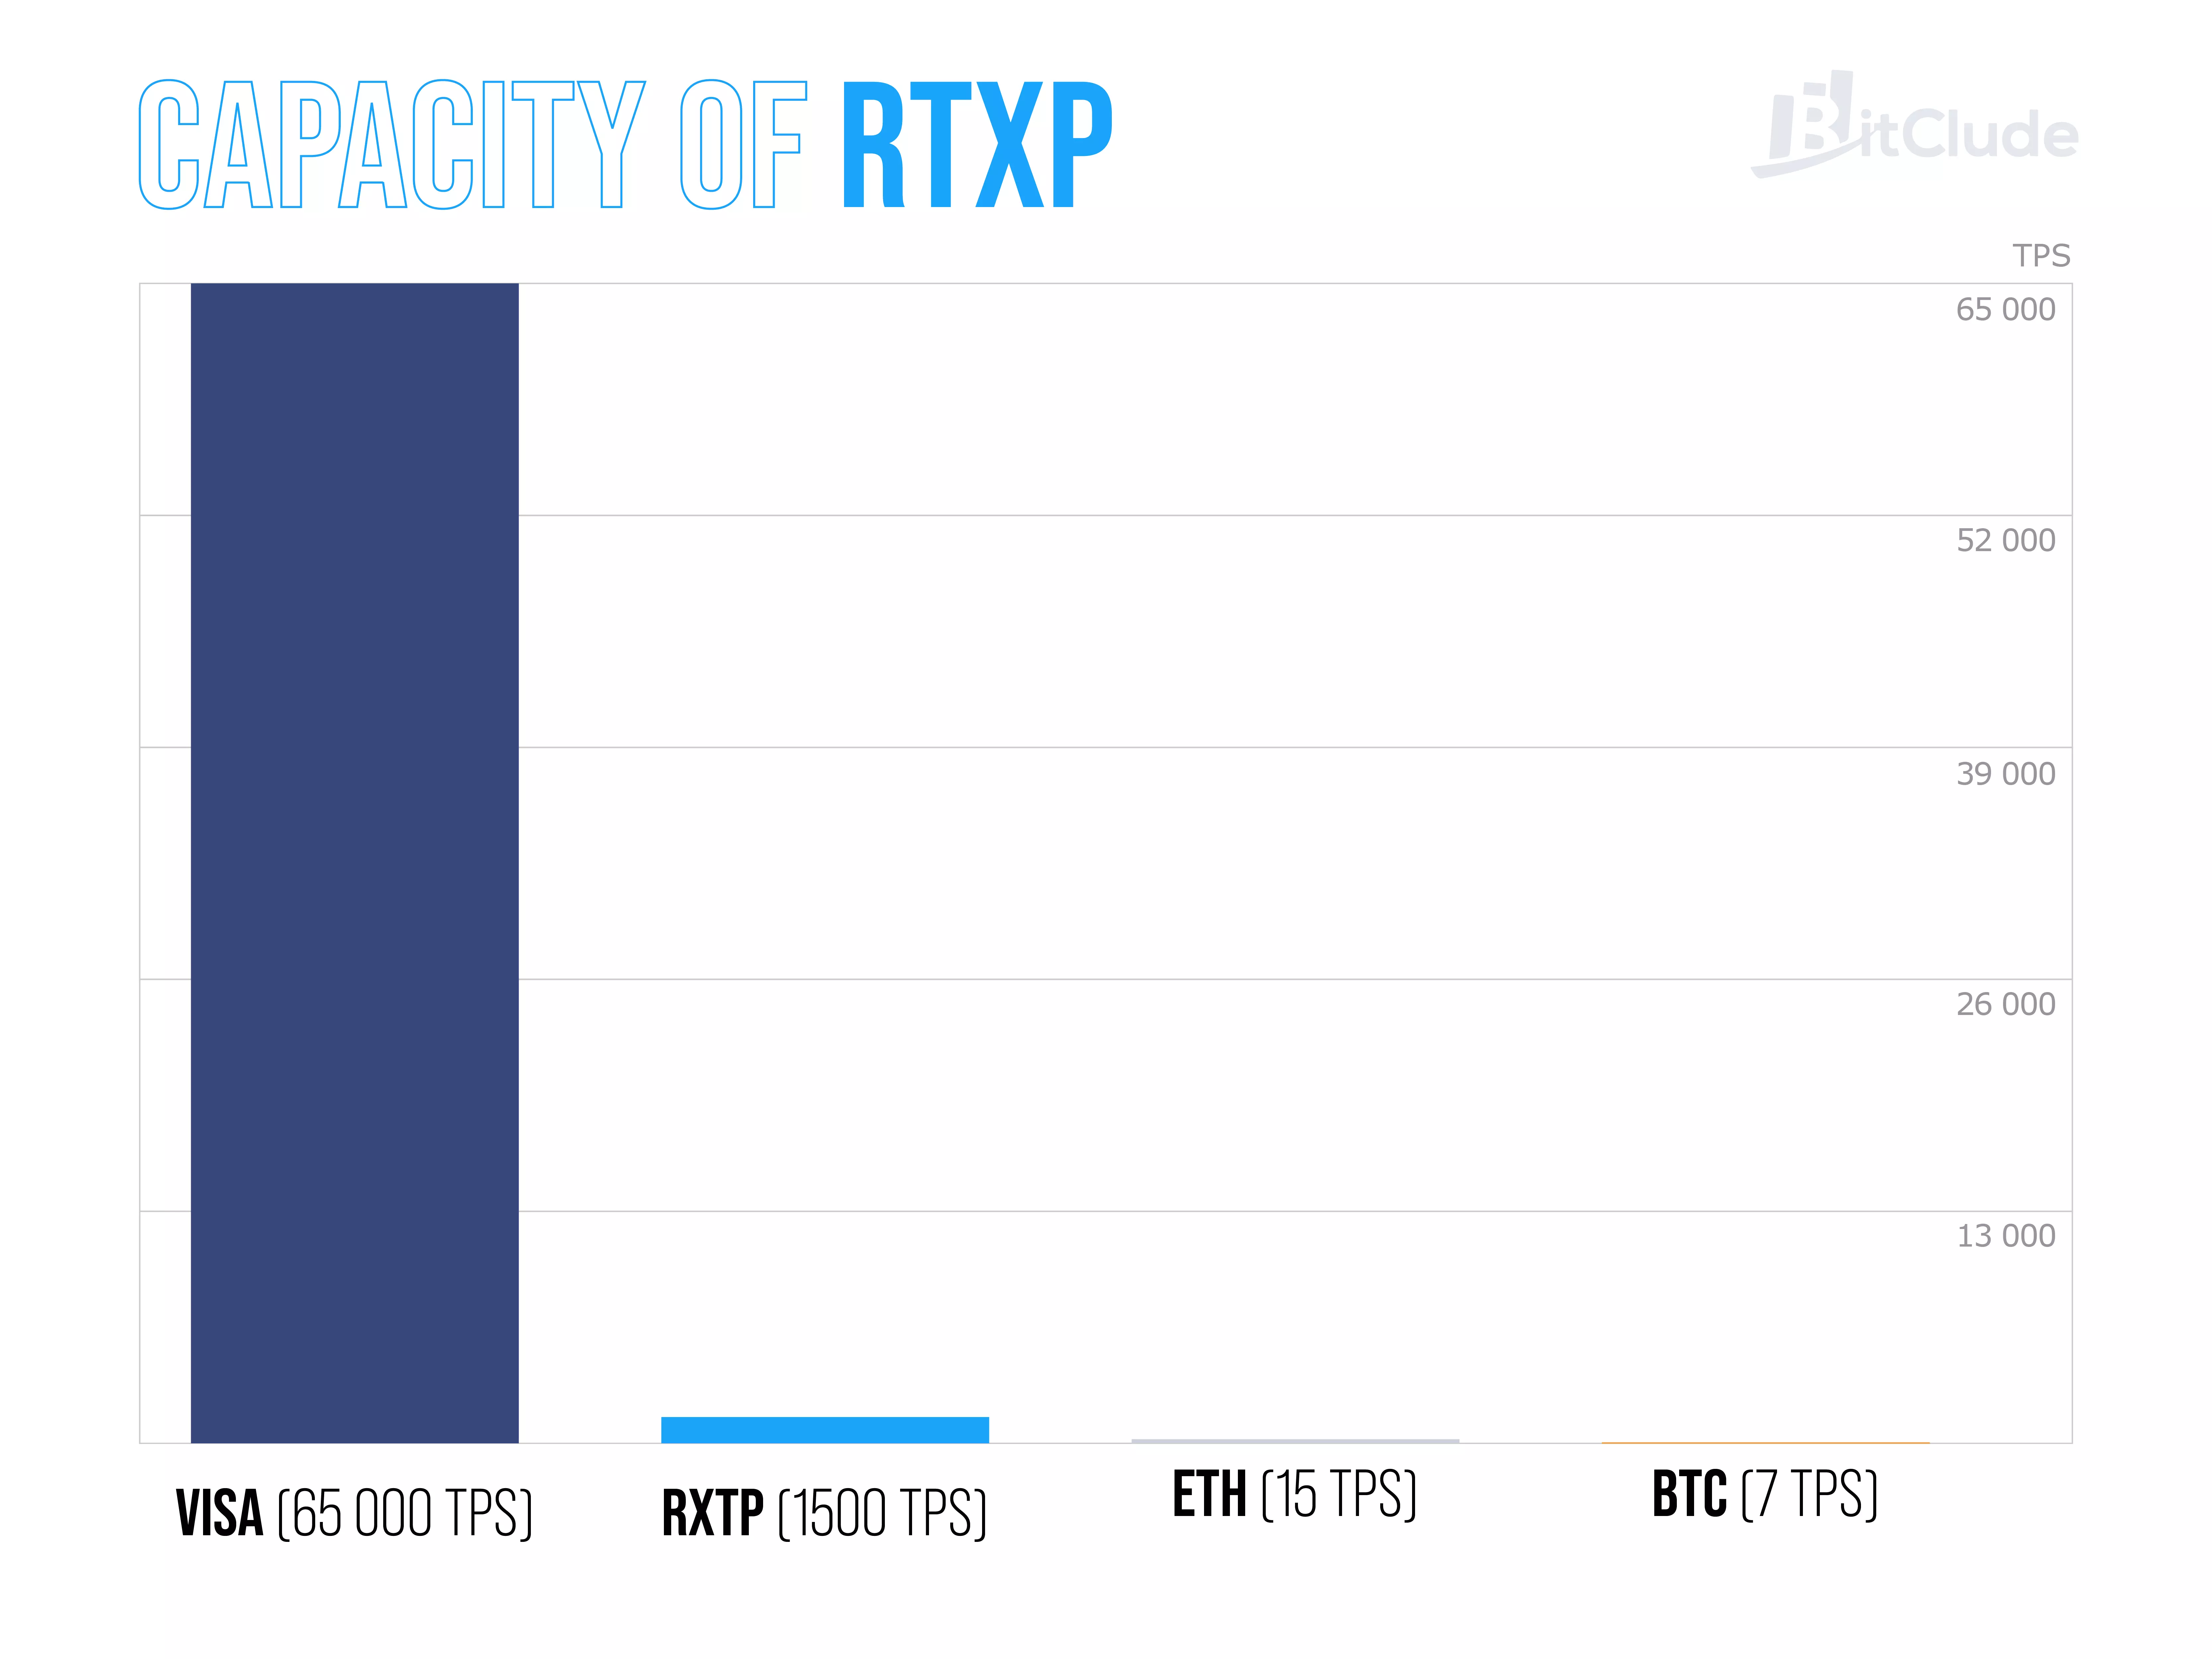 RTXP network bandwidth compared to VISA and traditional cryptocurrencies.